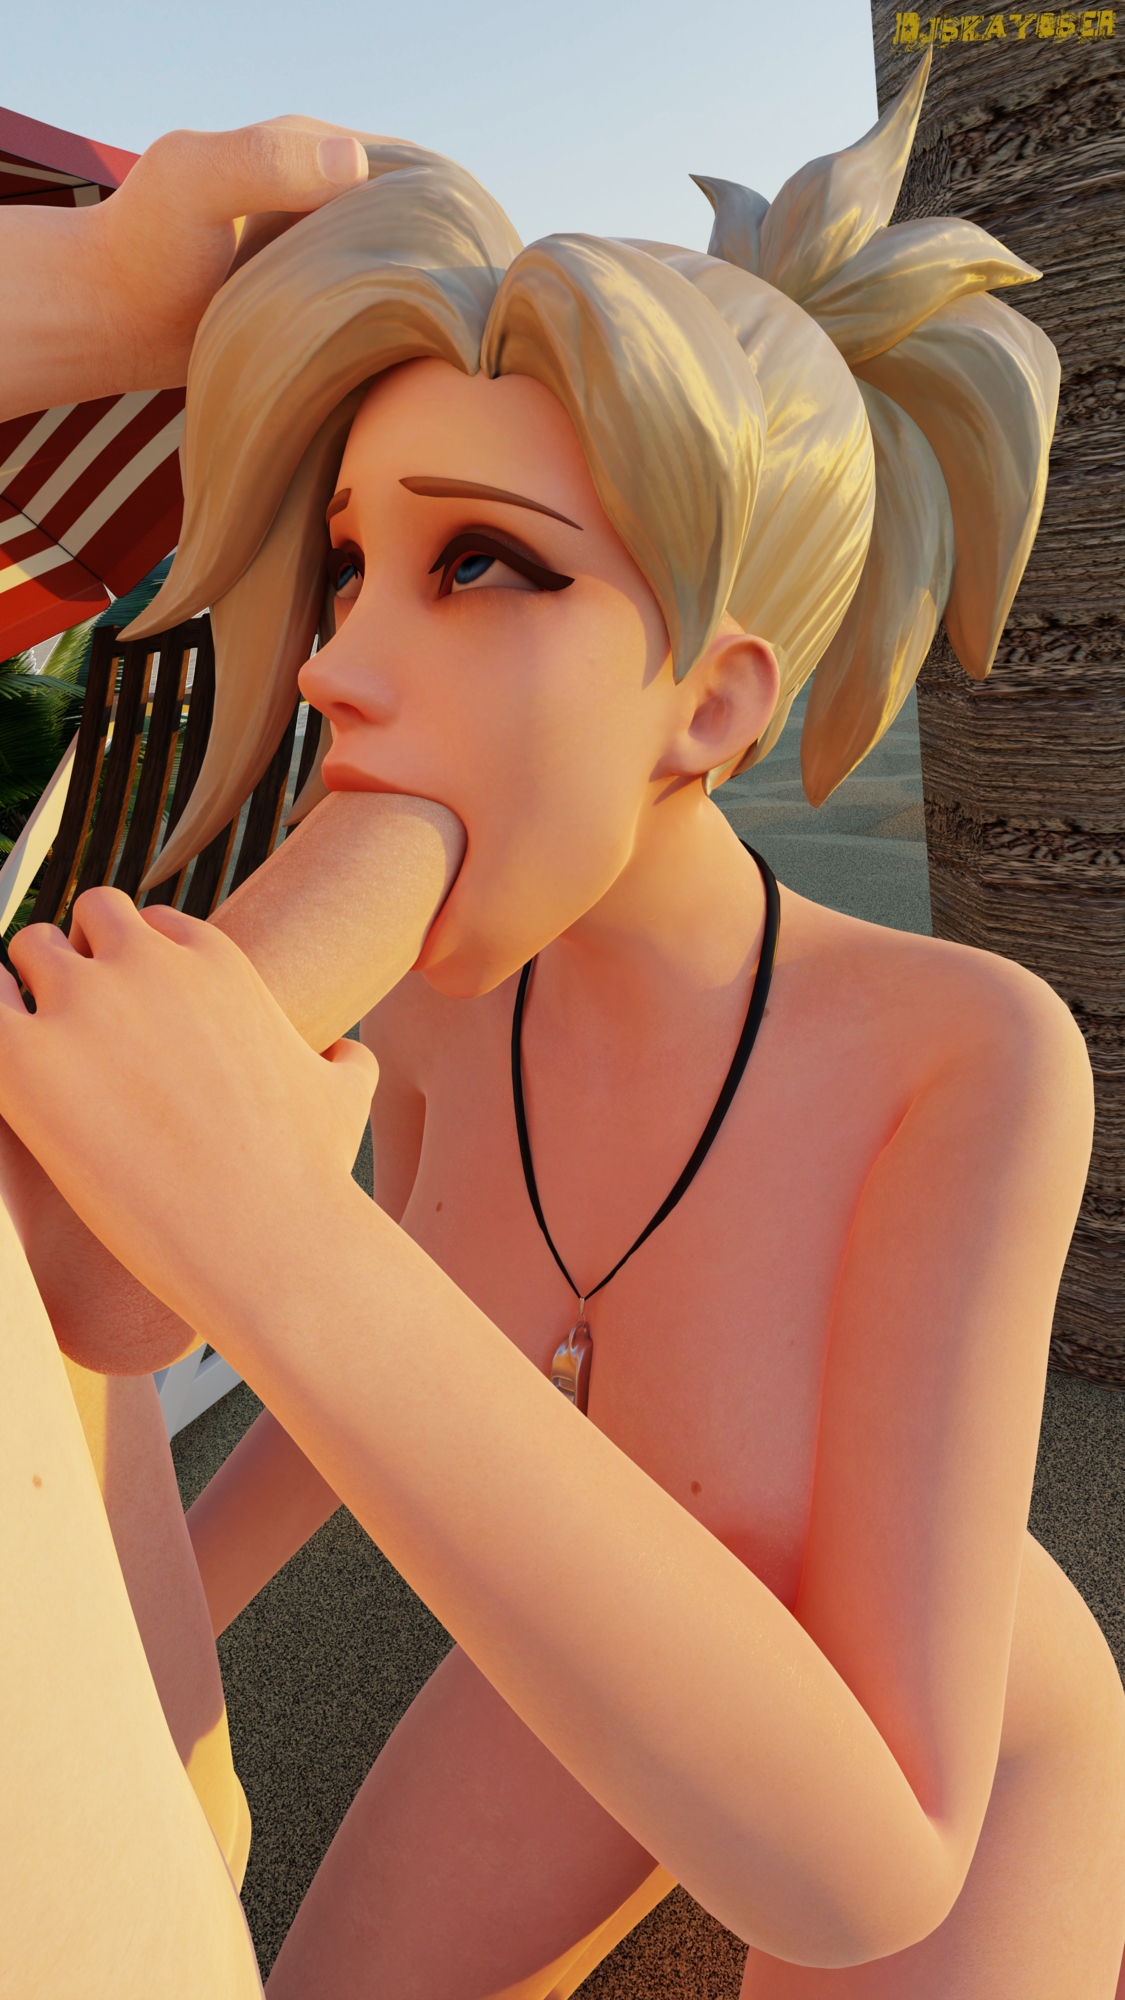 Inviting moment on the beach, part 5.1 (The end) Mercy Mercyoverwatch Overwatch Nsfw Rule34 Rule 34 Blender3d Blendernsfw 3dnsfw Artshare 2